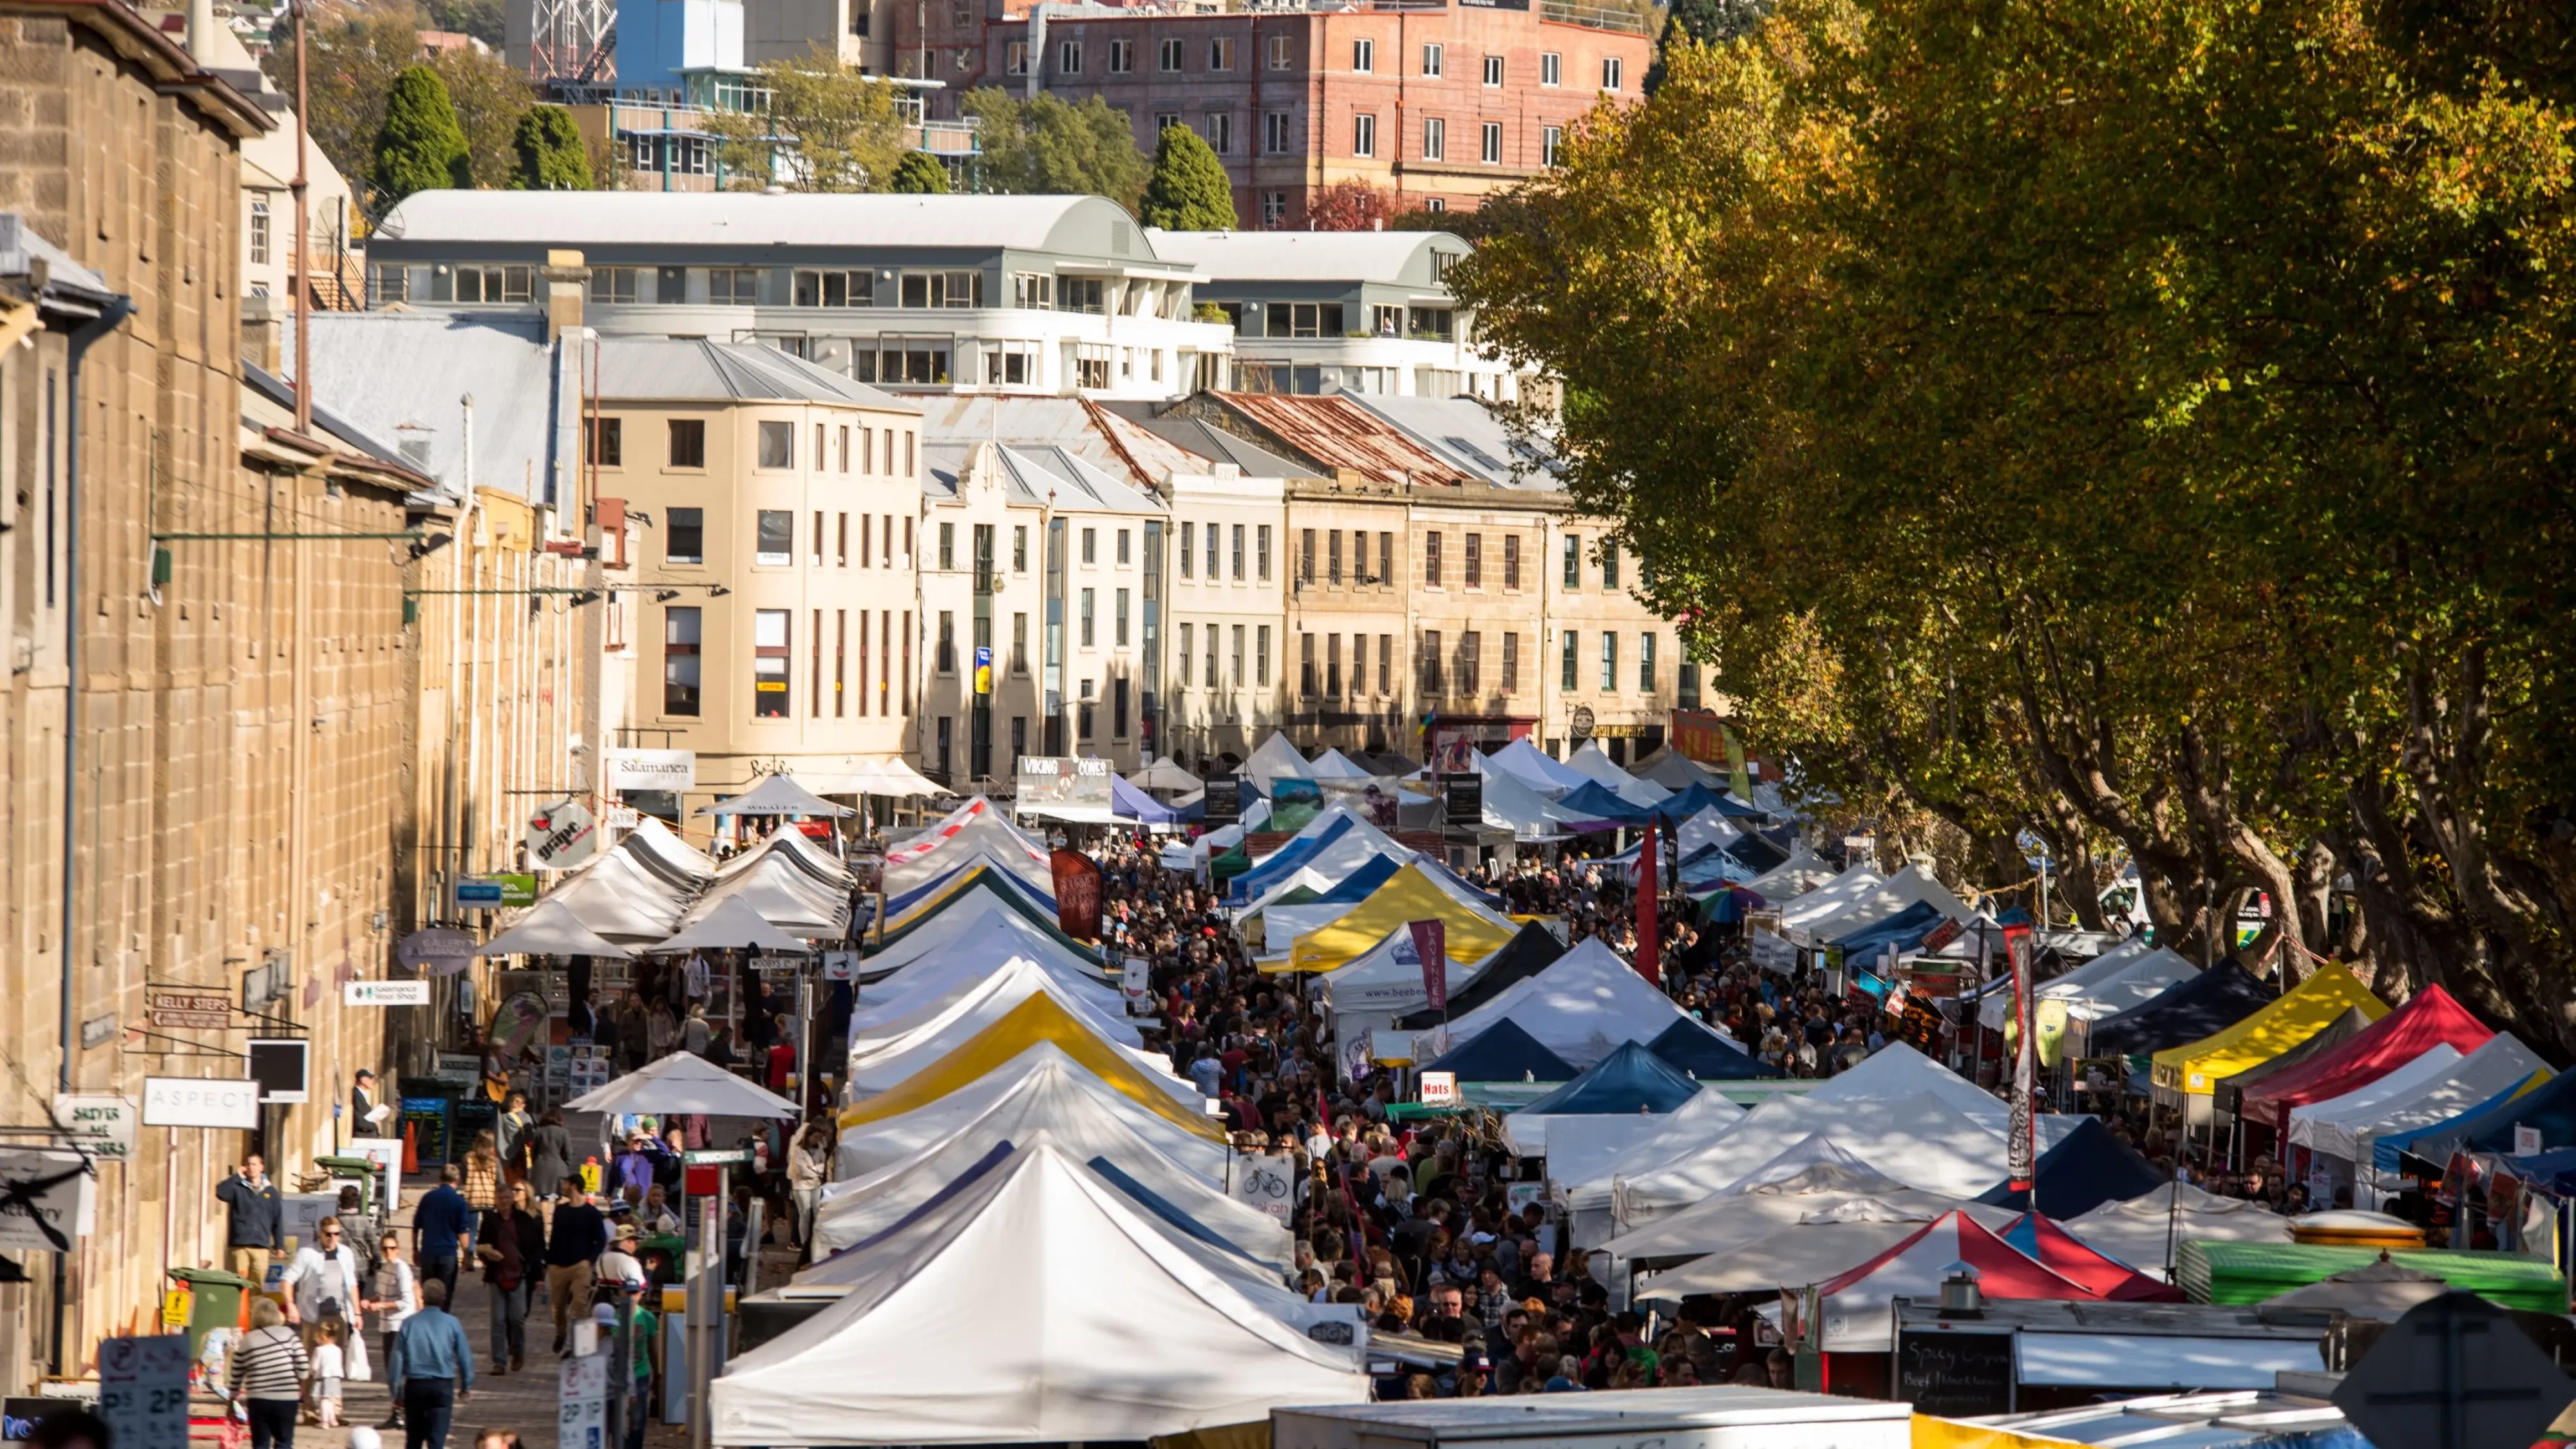 Rows of market stalls in front of sandstone buildings at Salamanca. Image credit: City of Hobart and Alastair Bett